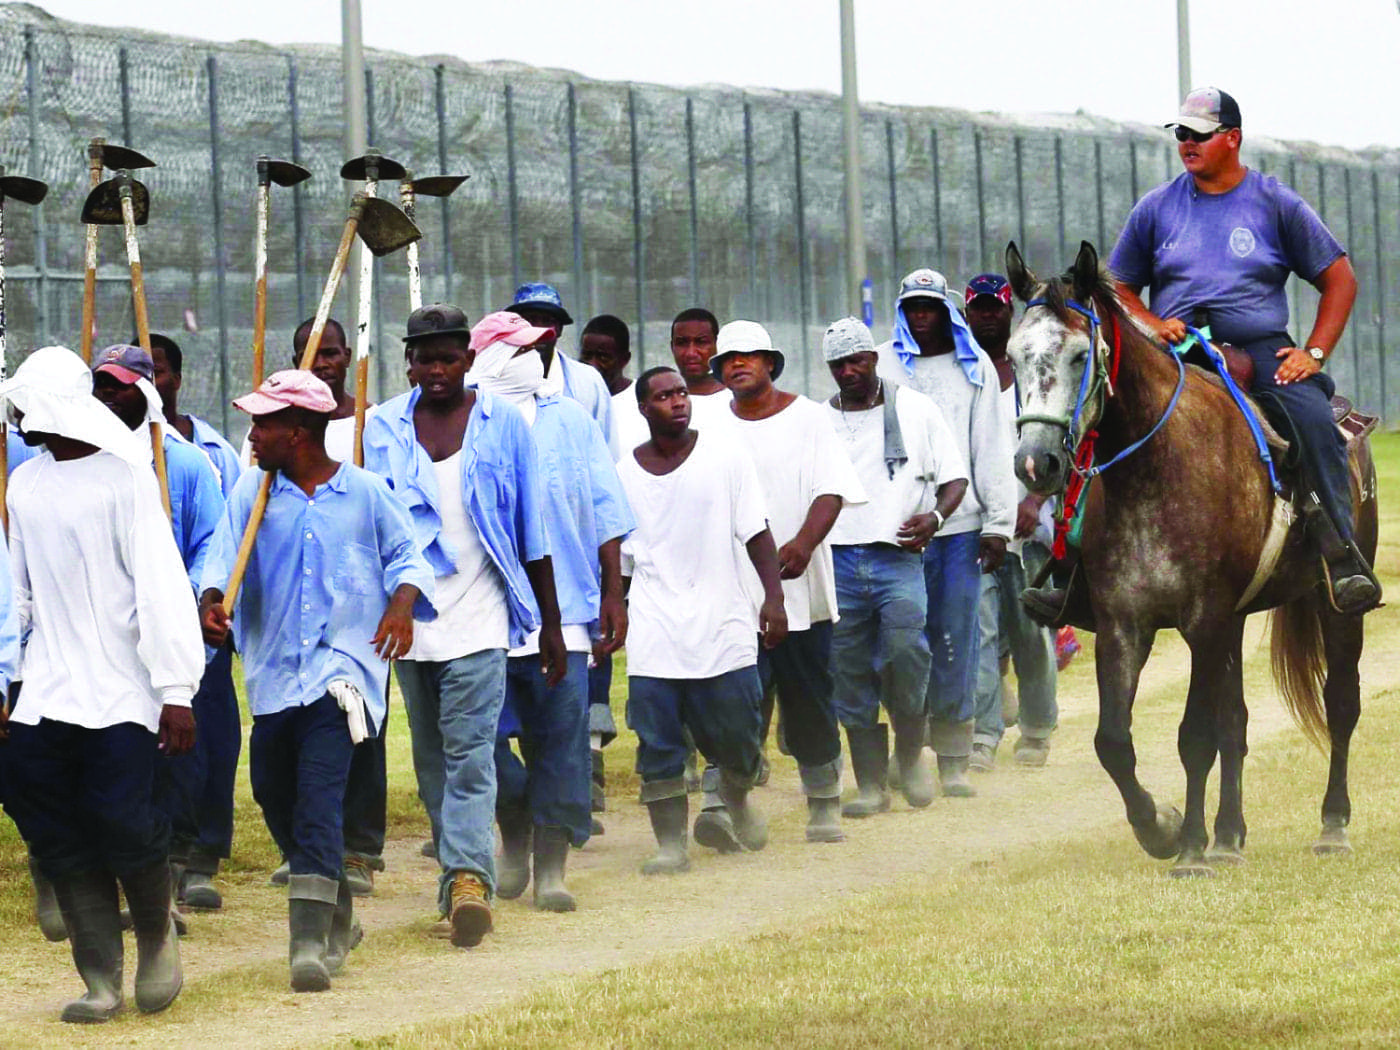 Angola-prisoners-hoe-squad-marched-back-after-day-of-farm-work-081811-by-Gerard-Herbert-AP-1400x1050, Imprisoned in ‘Sundown Towns’: The racial politics of my domestic exile, Behind Enemy Lines 